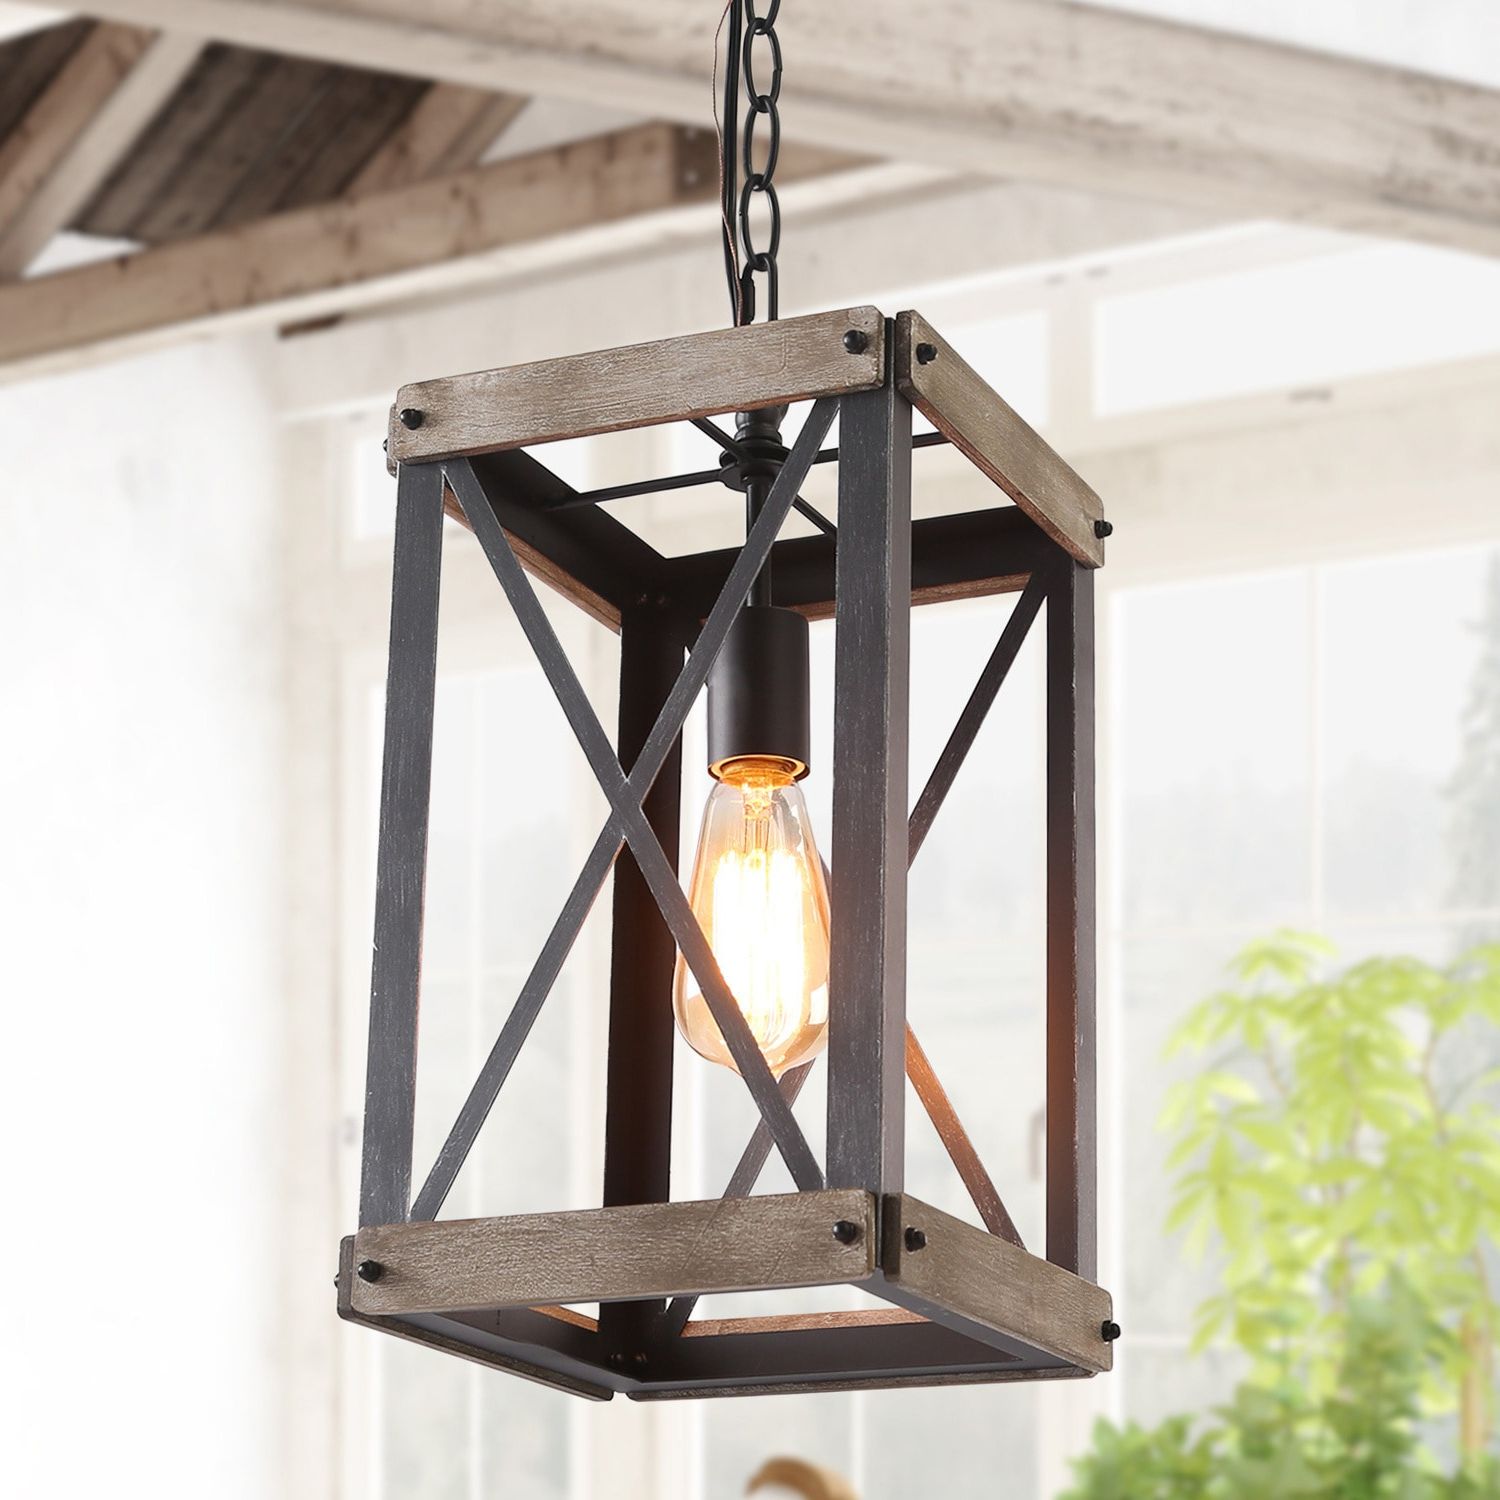 Black Lantern Chandeliers For Most Current Lnc Laius Solid Pine Wood And Matte Black Farmhouse Lantern Led Mini  Kitchen Island Light In The Pendant Lighting Department At Lowes (View 14 of 15)